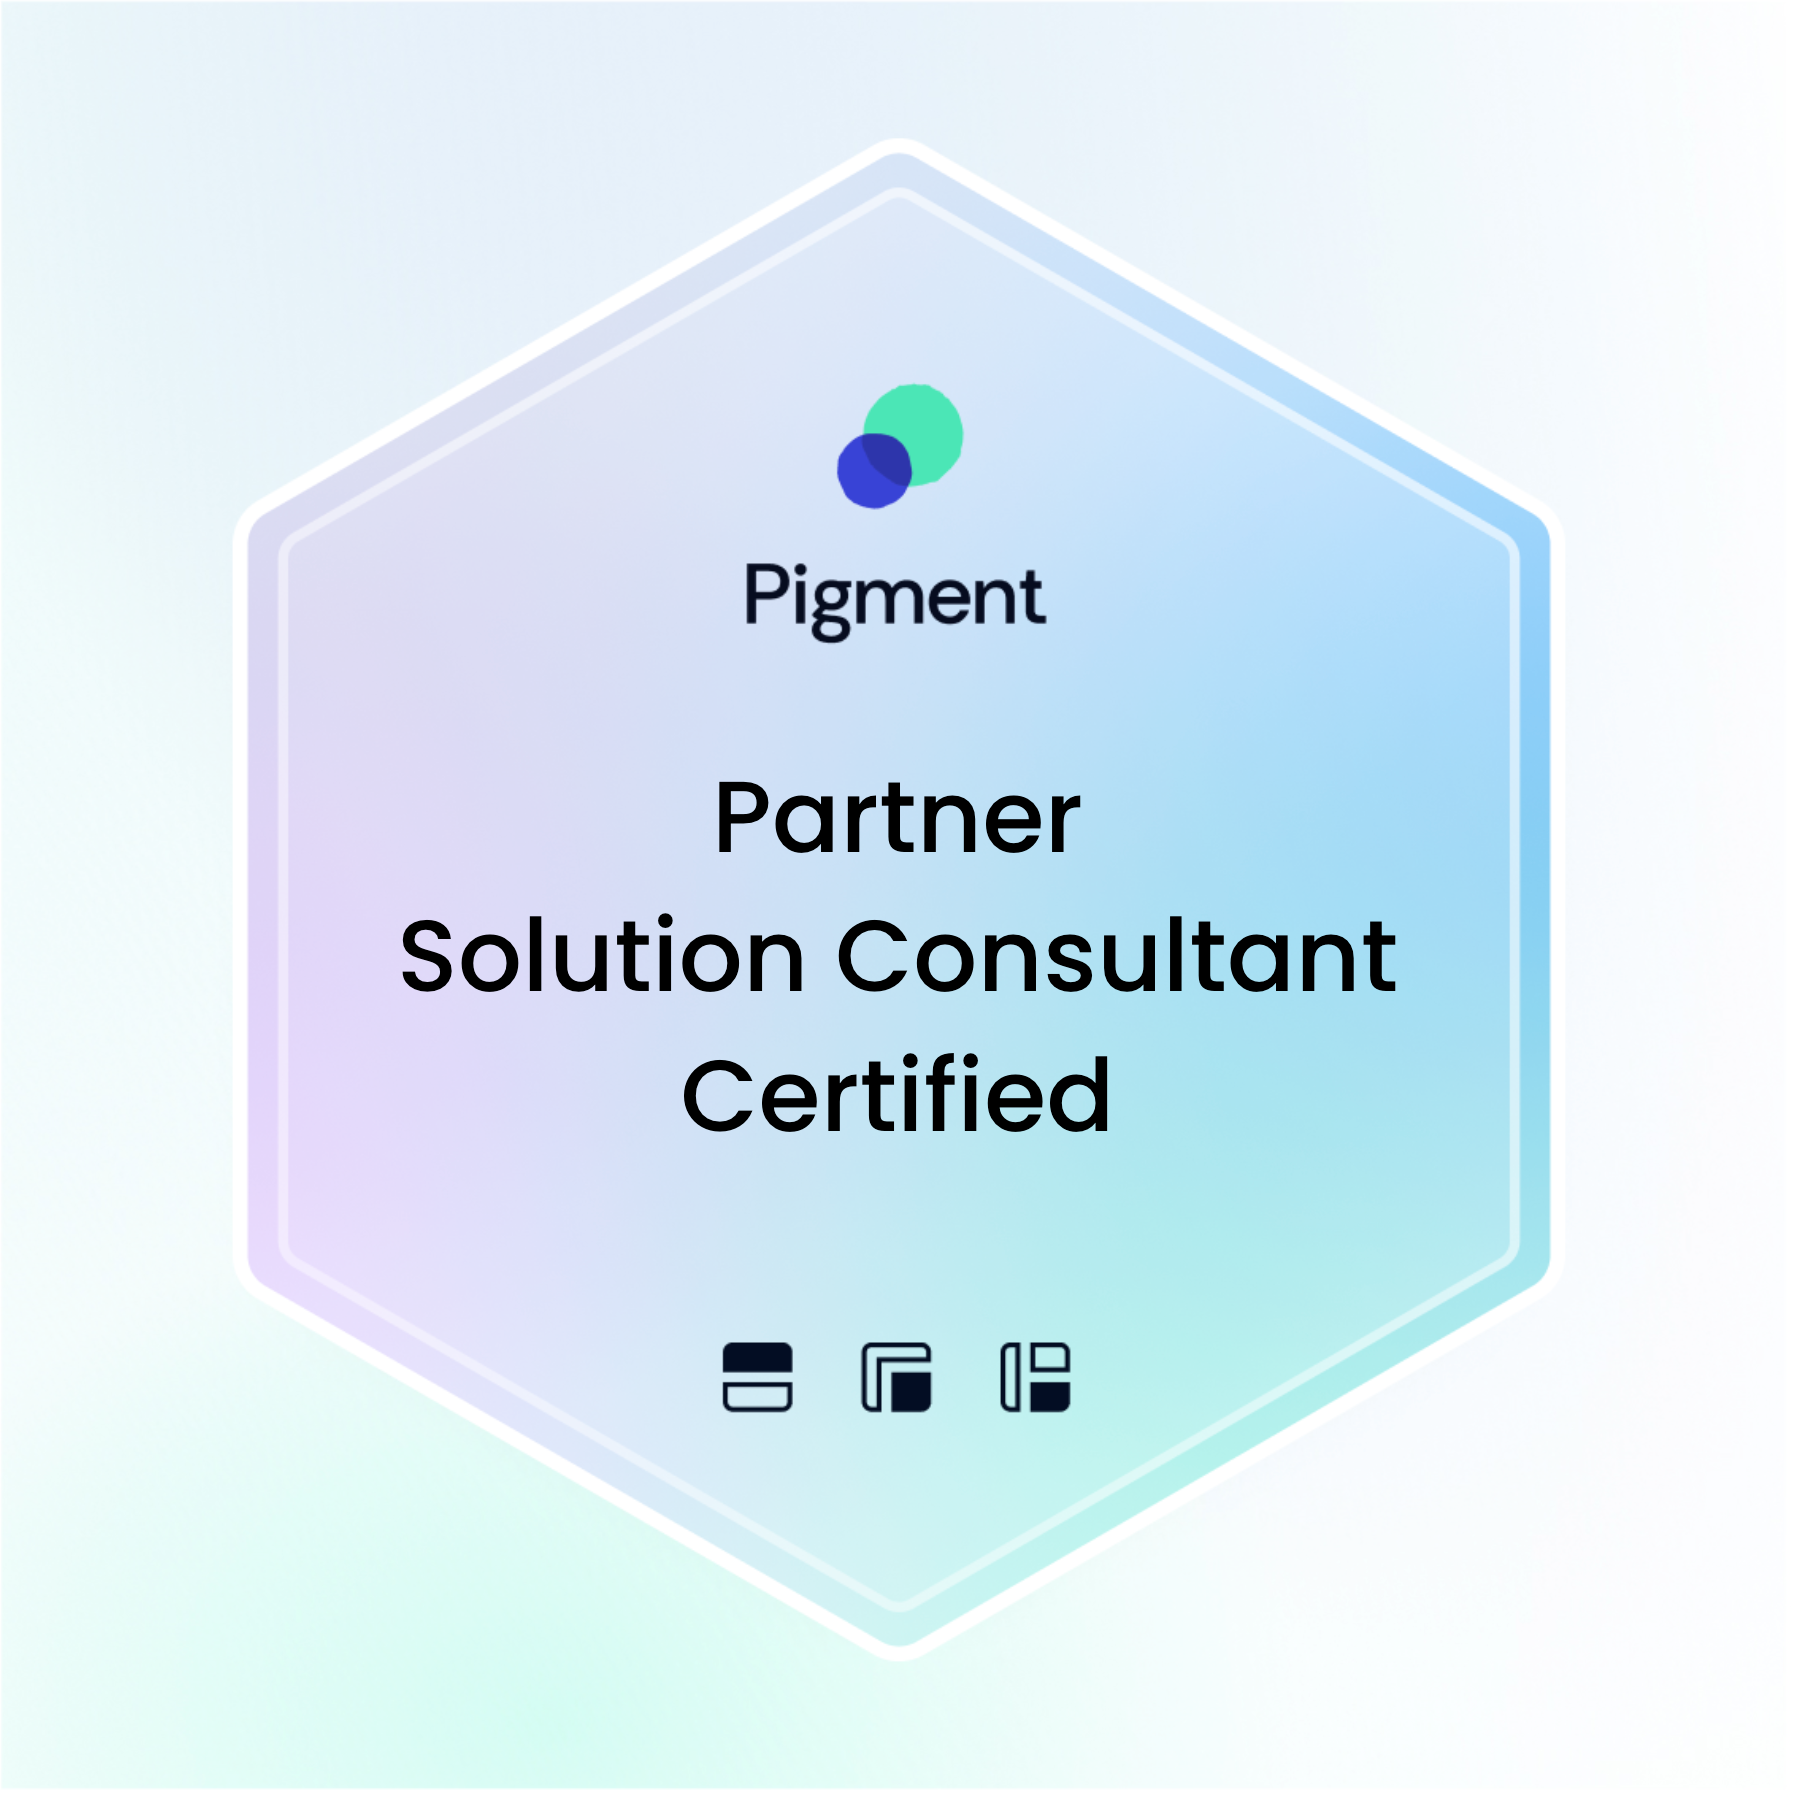 Partner Solution Consultant Certified